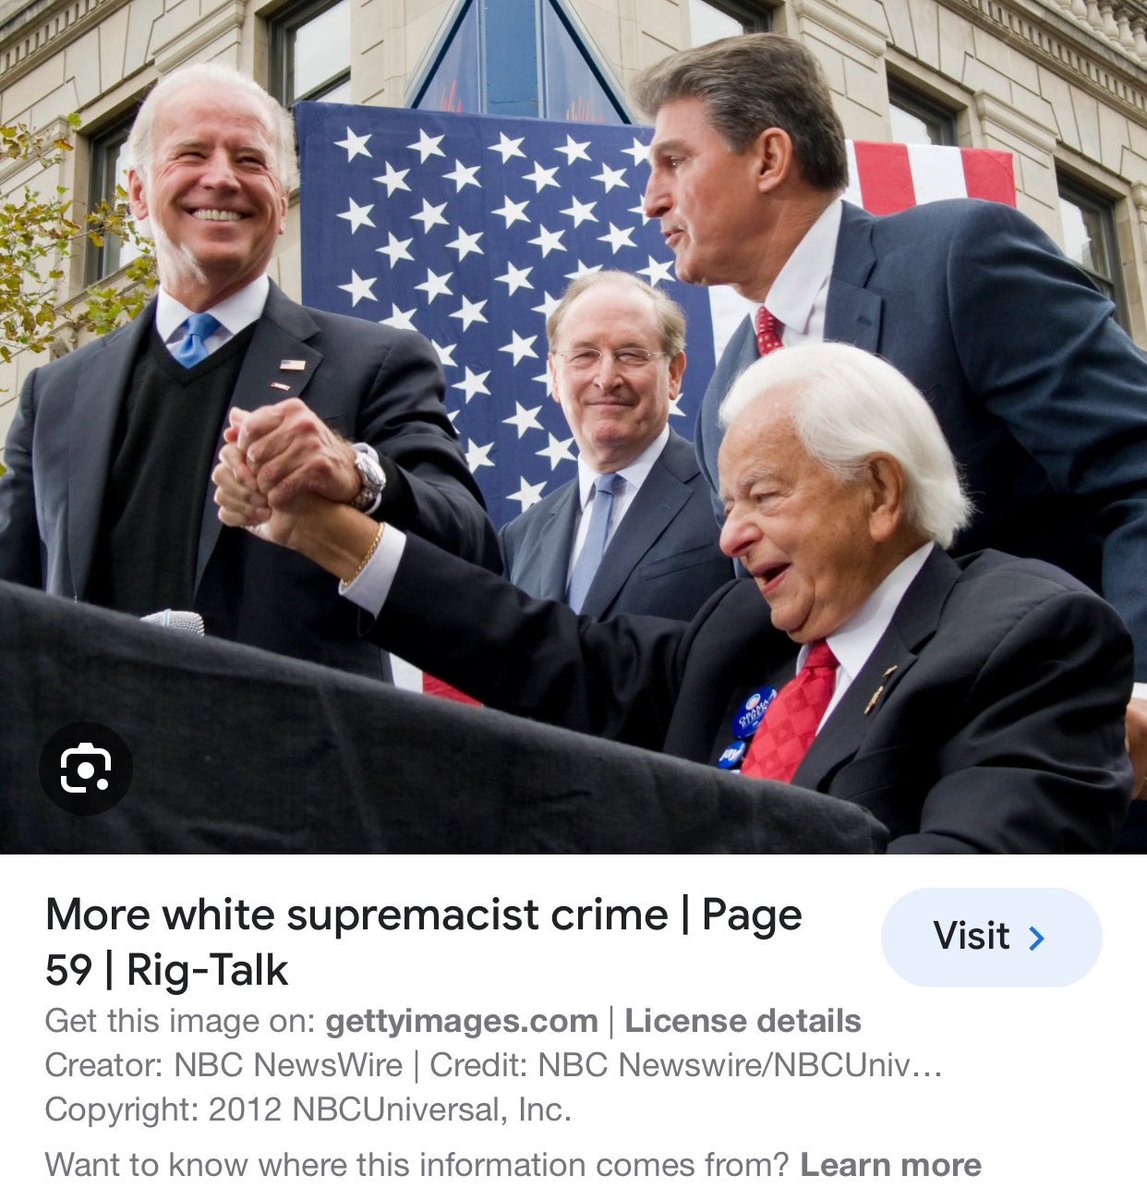 Abby, as a House Hand for the Democrat Plantation, and the “Control Negroes Network” @cnn, you failed to inform your viewers that @JoeBiden, the modern day white supremacist’s best friend and mentor was the Grand Pooh Pah chapter president of the West Virginia Klu Klux Klan, Sen